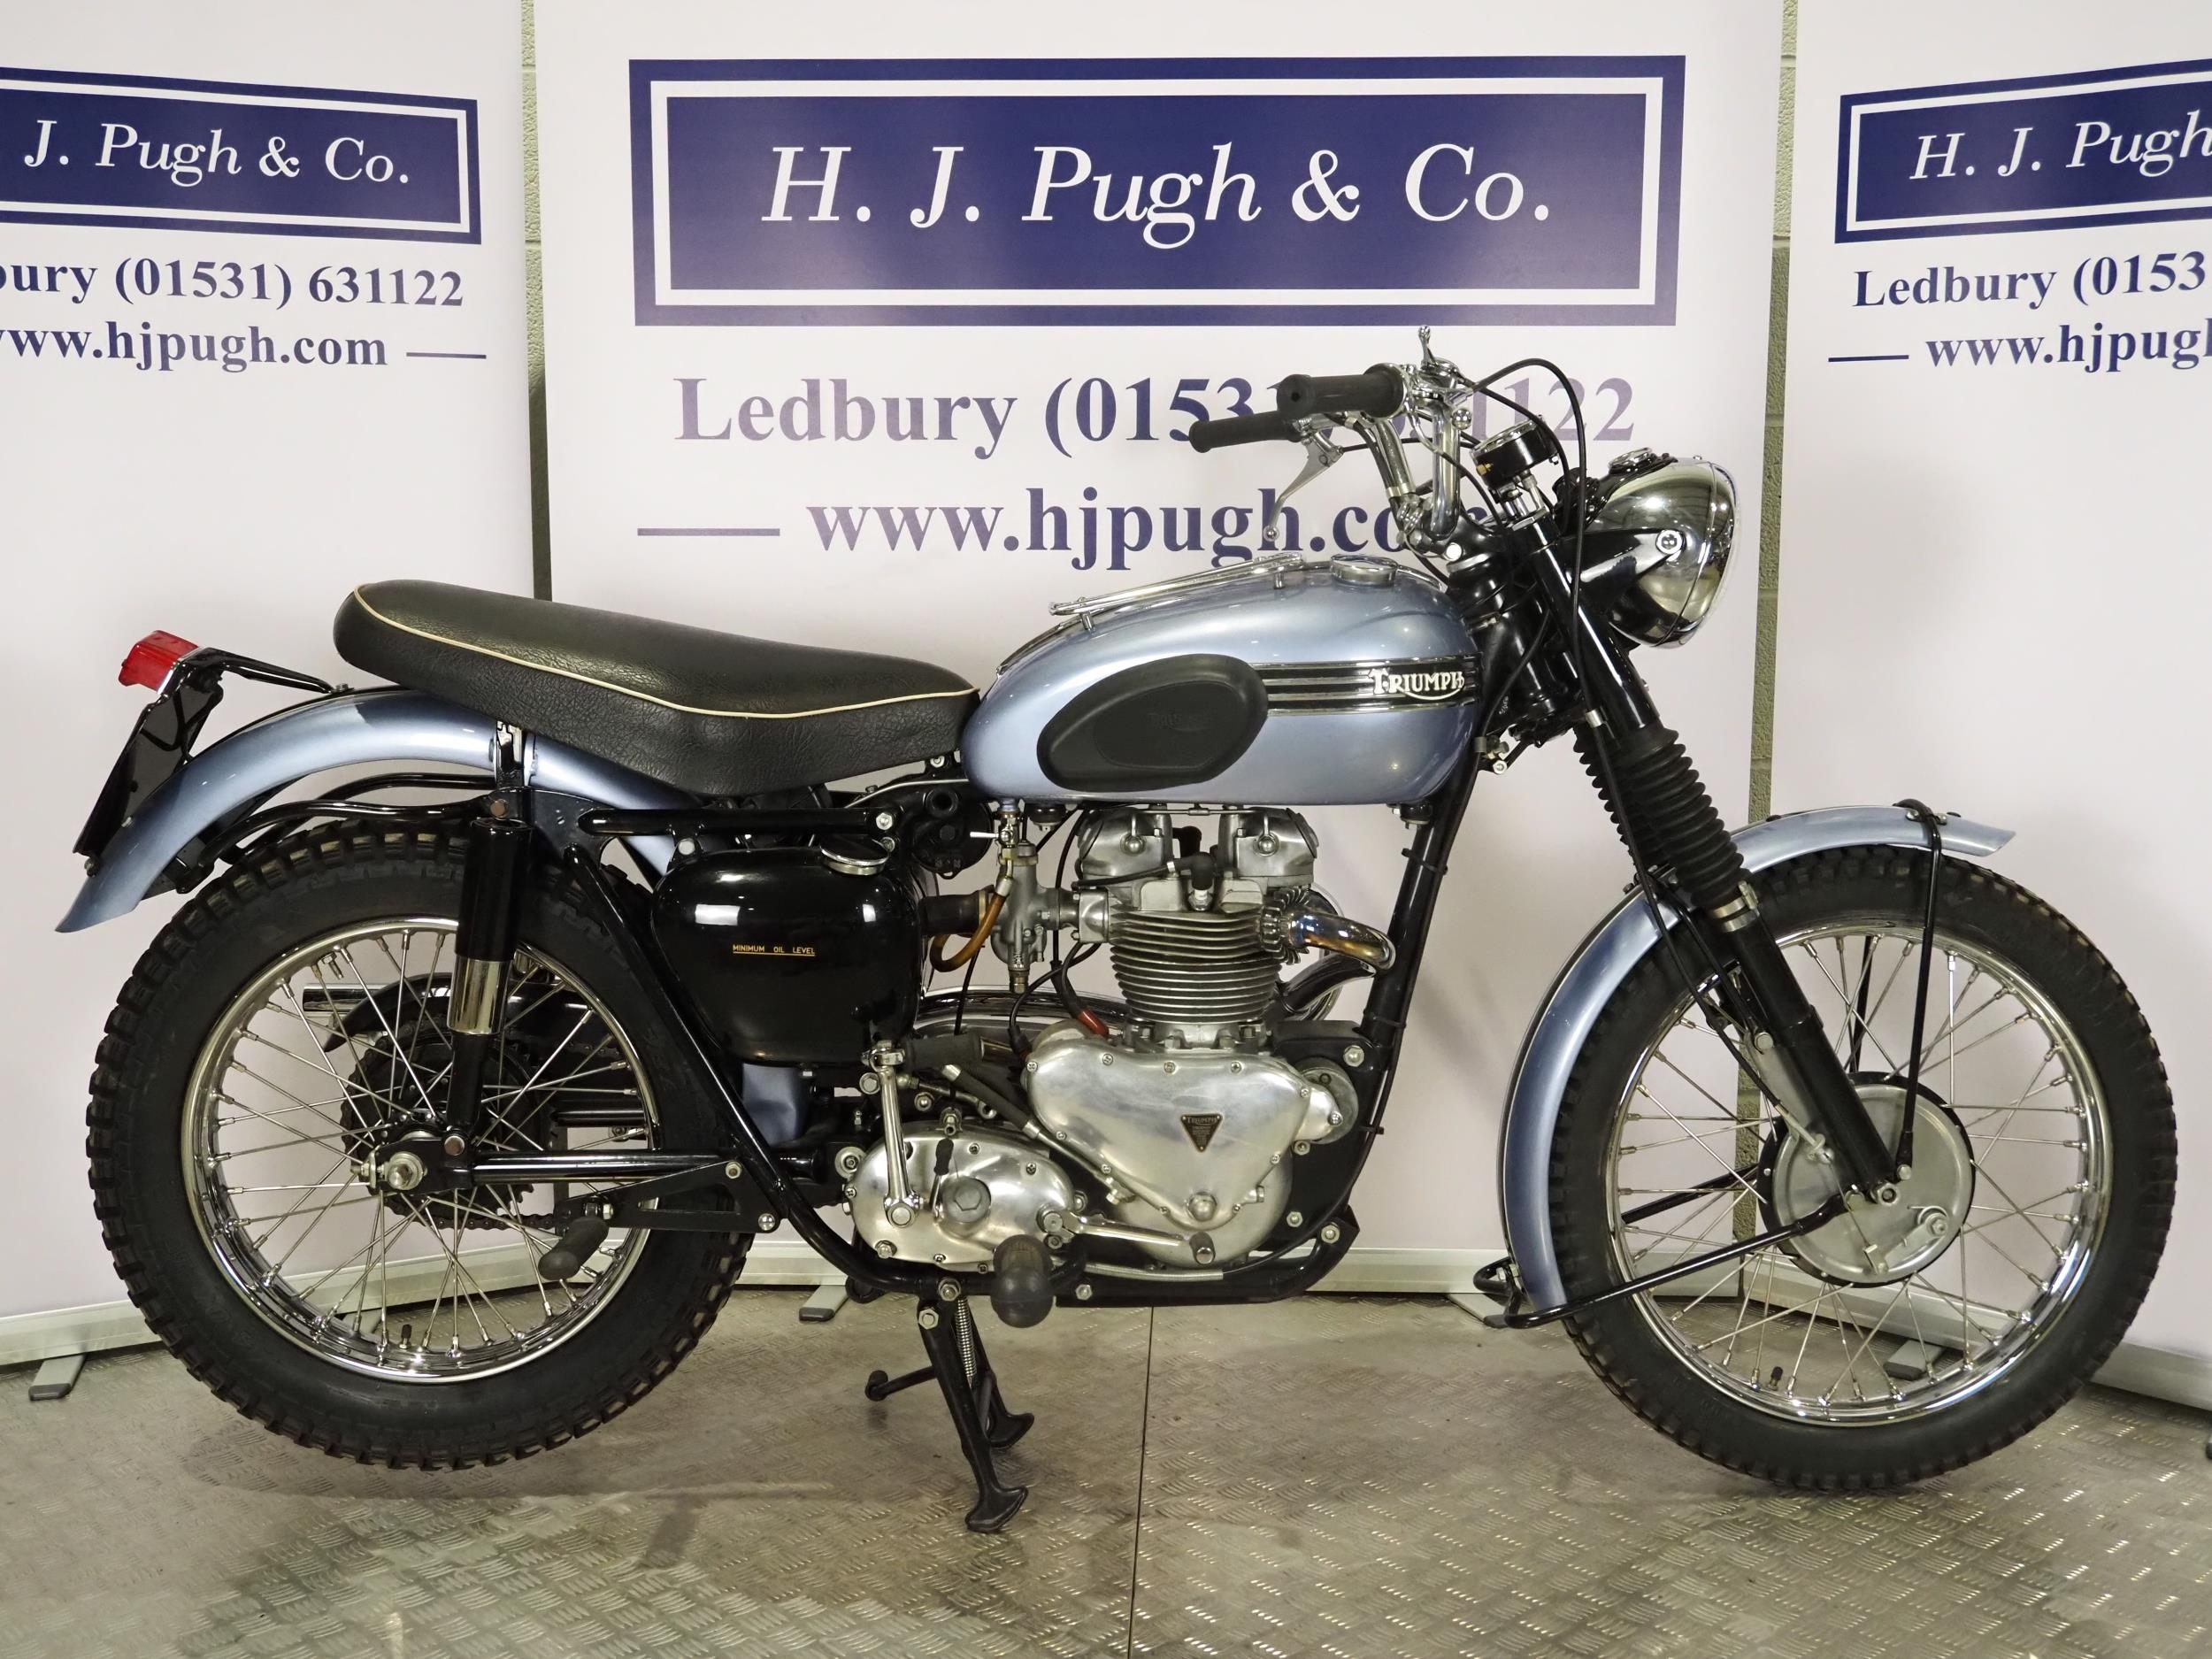 Triumph TR6 Trophy motorcycle. 1956. 650cc Frame No. 81764 Engine No. TR6 81764 Engine turns over